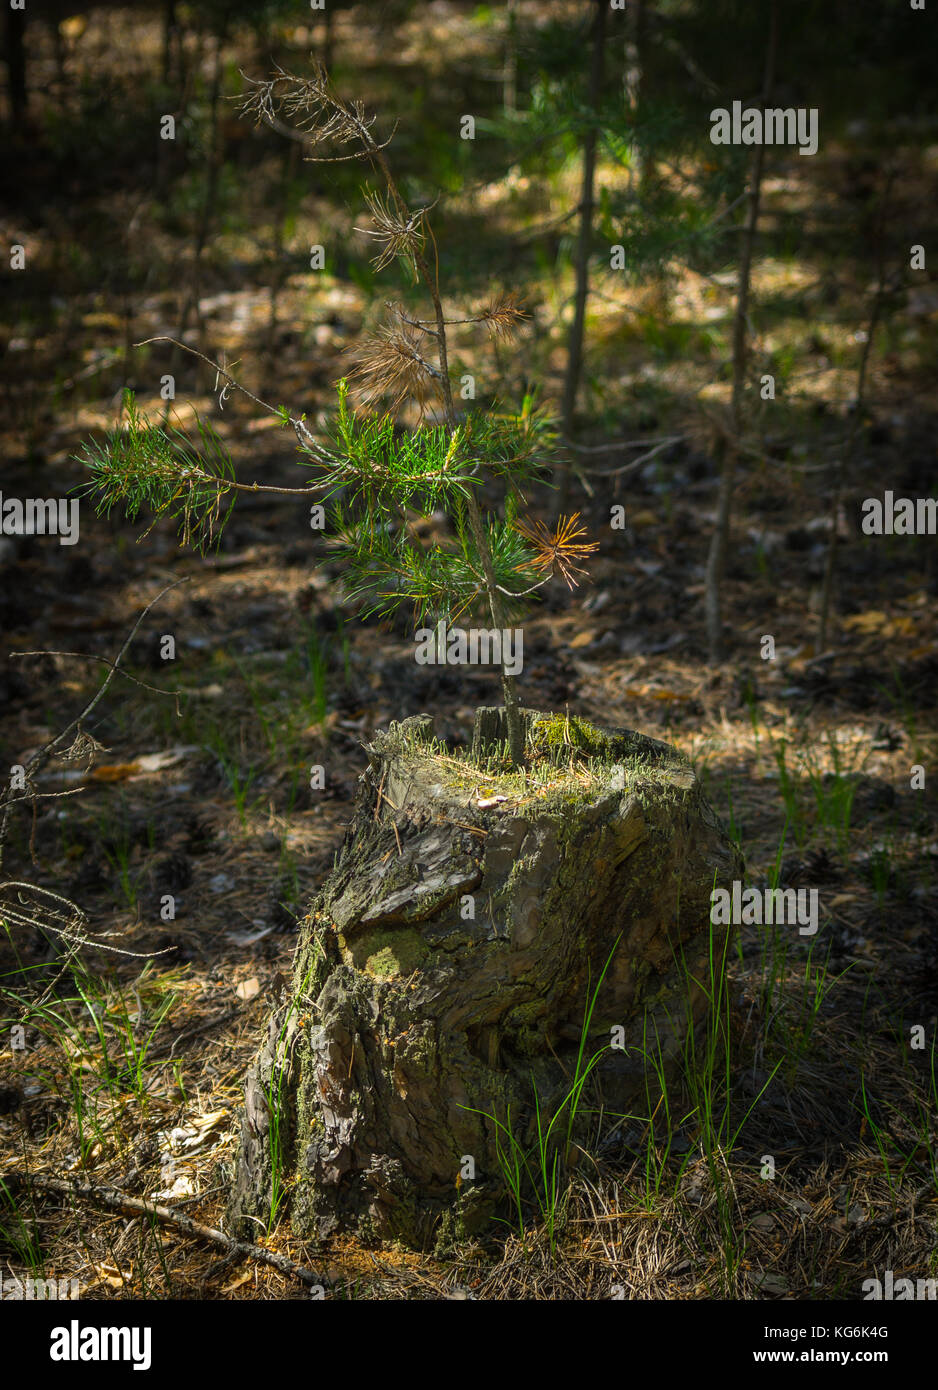 A pine tree sapling on an old stump lit with bright sun in the forest Stock Photo